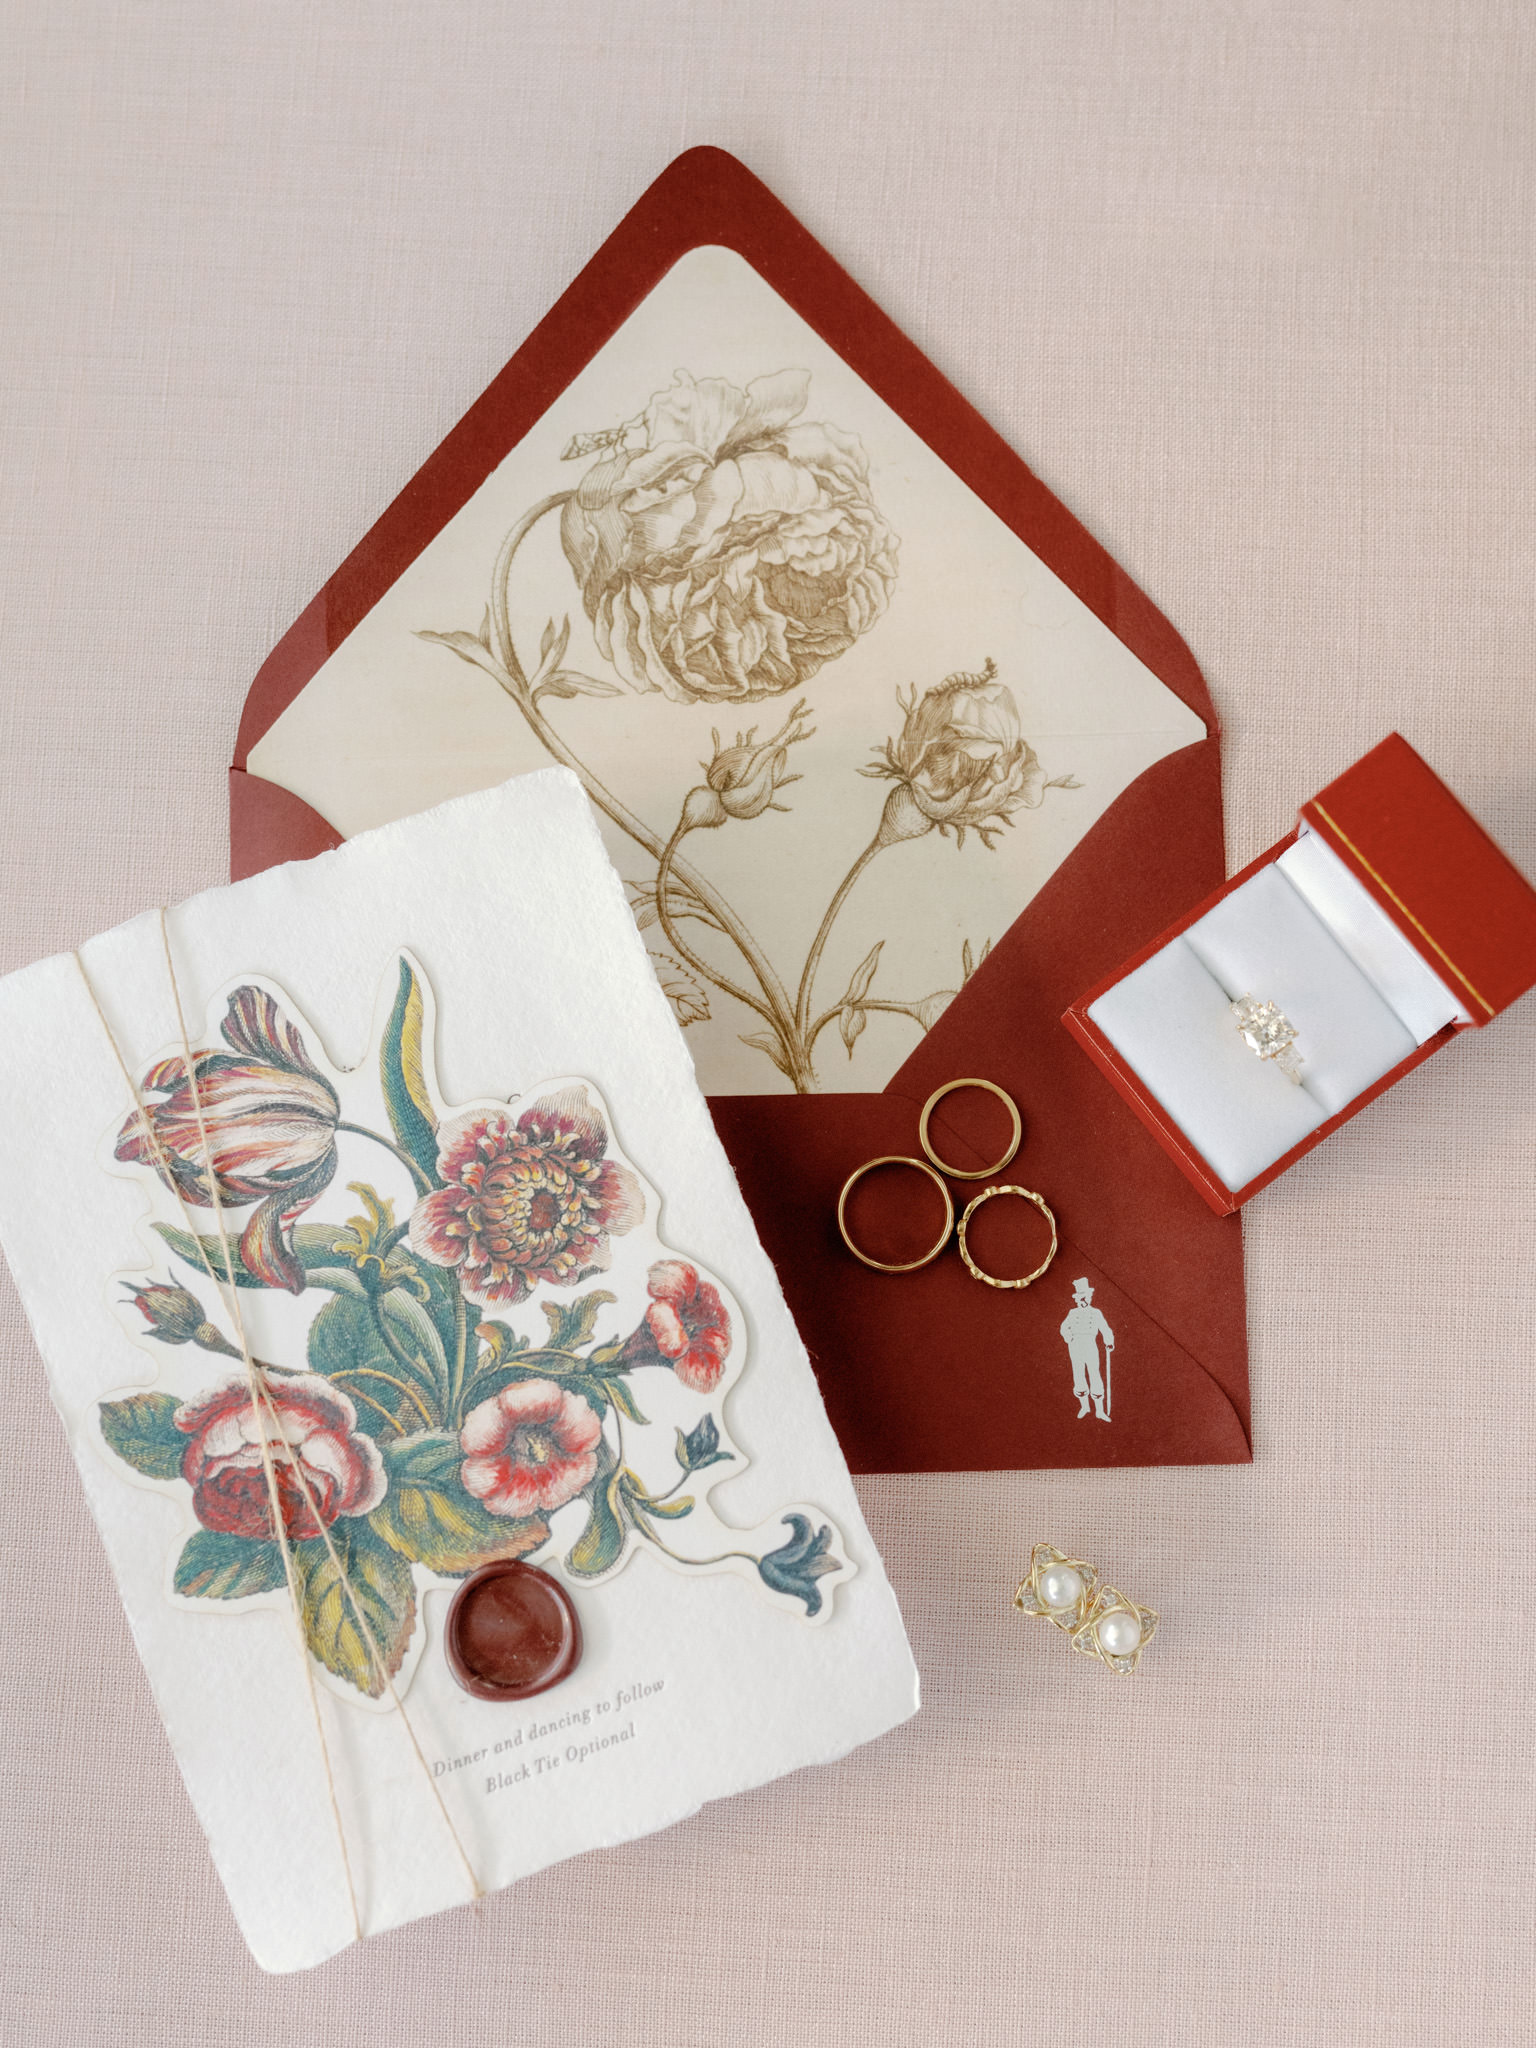 Photo of the couple's wedding invitation, wedding bands and accessories. Image by Jenny Fu Studio